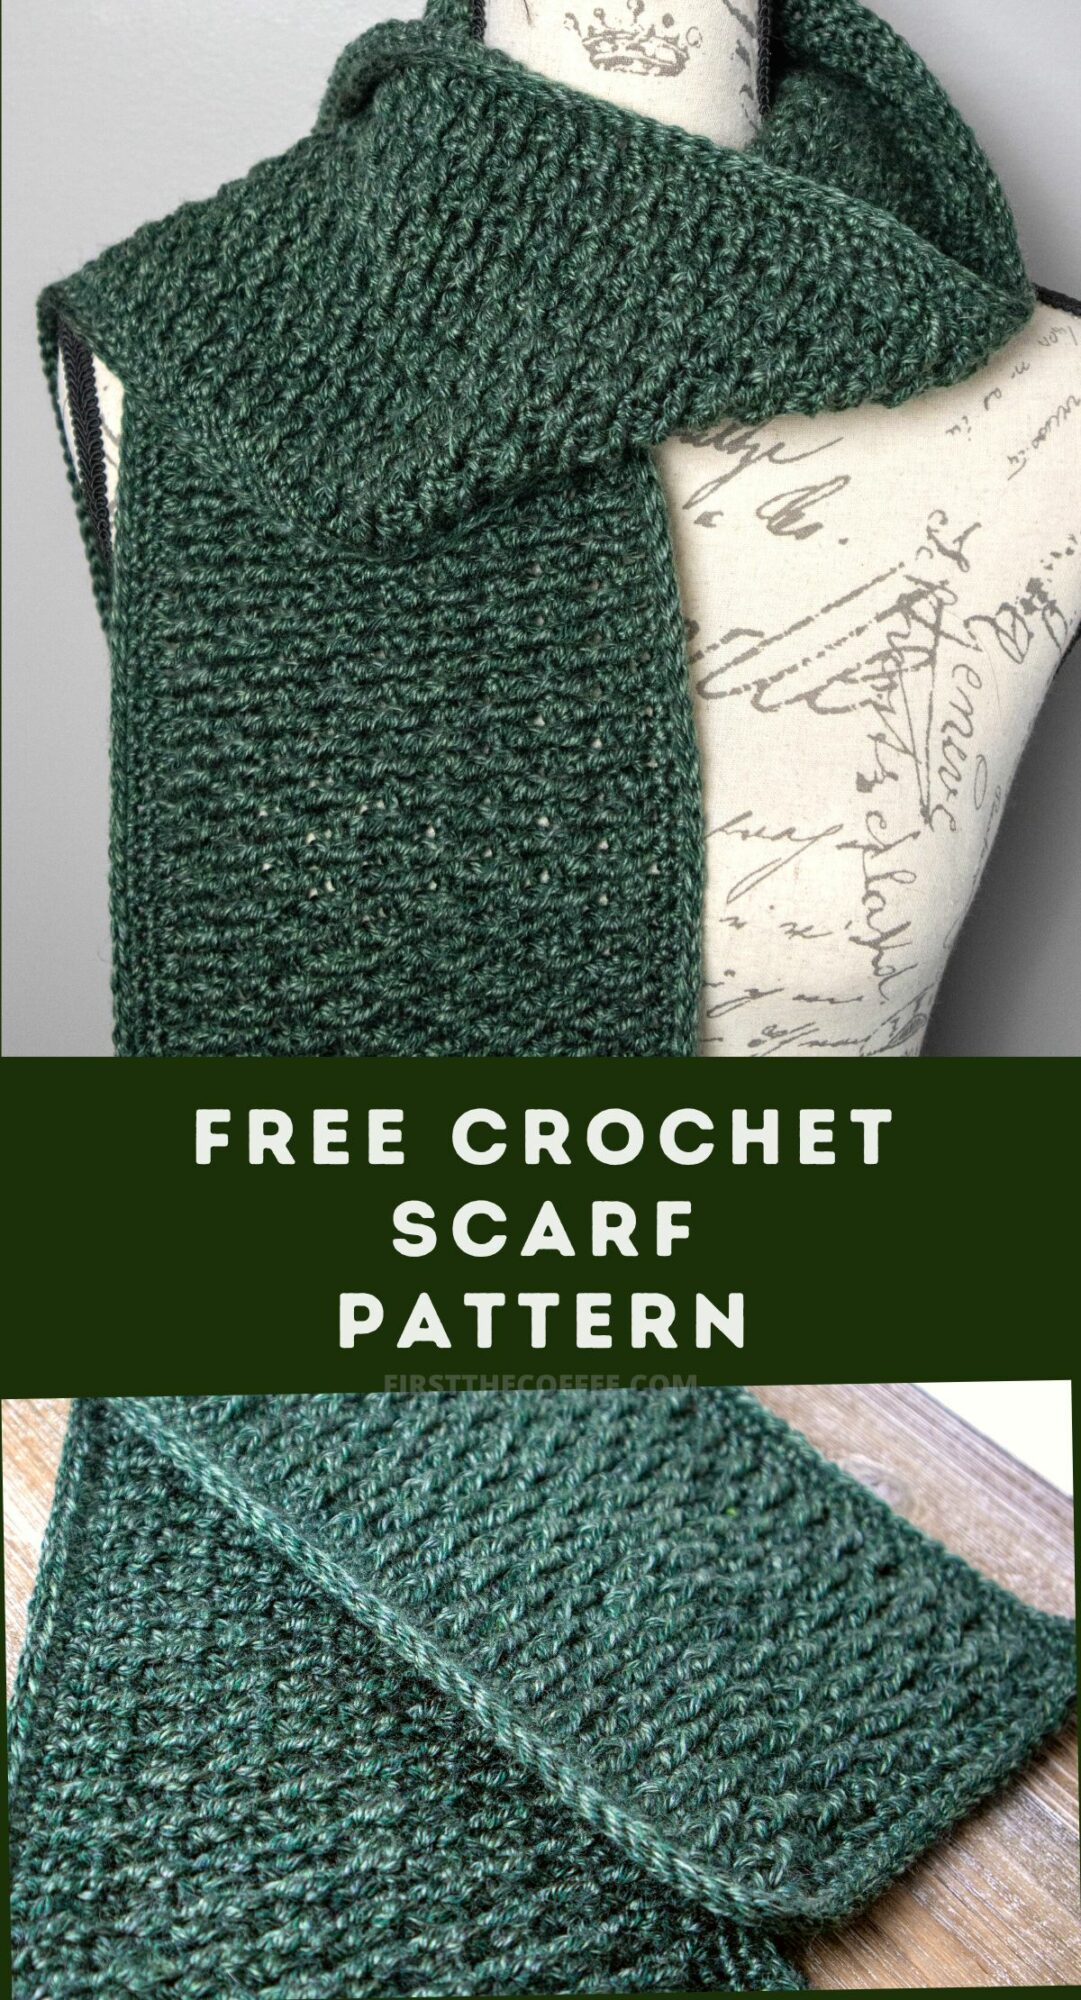 Free Crochet Scarf Pattern: The Alpine Forest Scarf made with Lion Brand Heartland Yarn